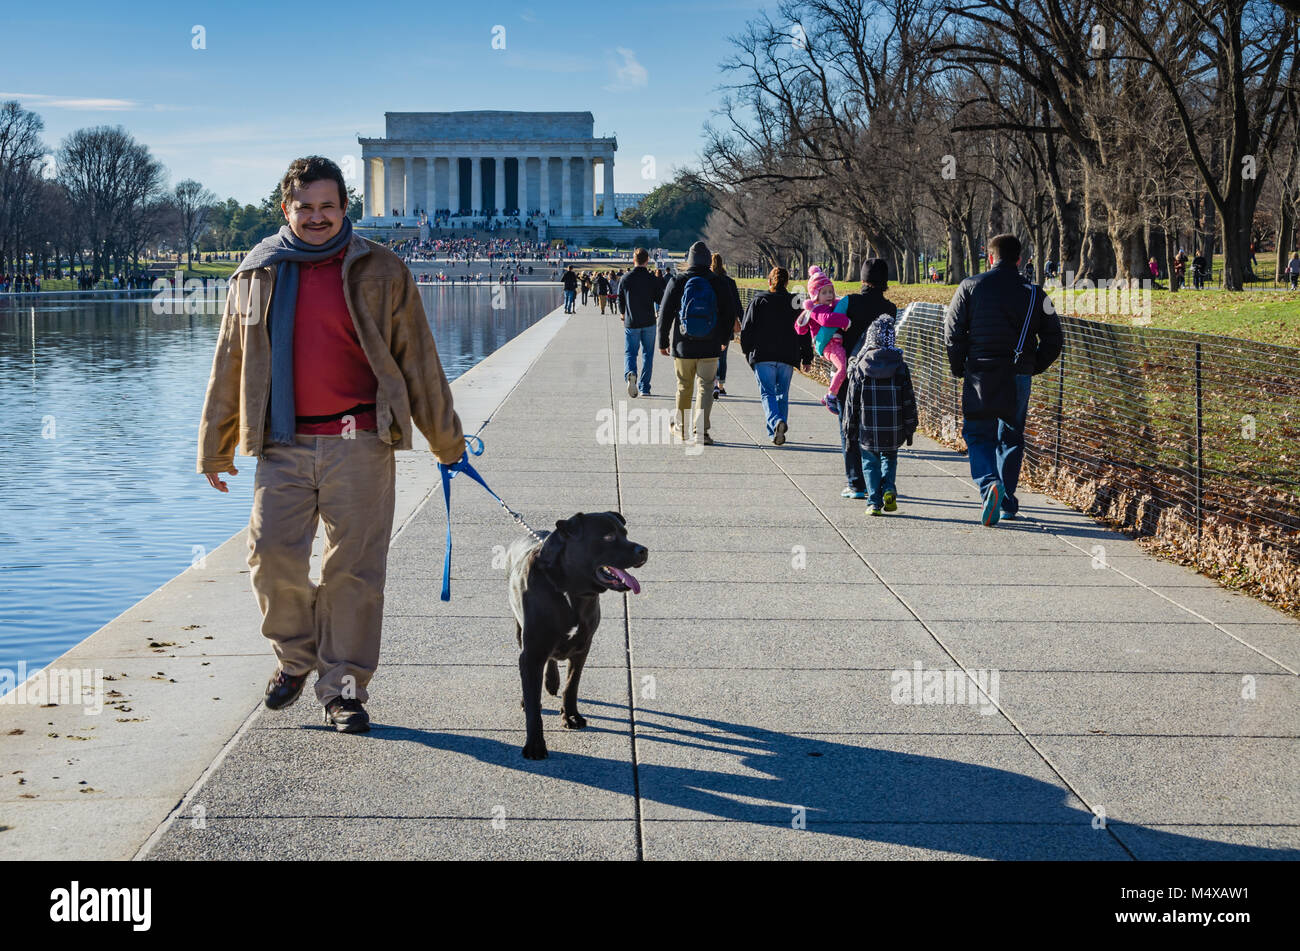 Man walking a dog on path by the Reflecting Pool in front of the Lincoln Memorial on the National Mall in Washington DC. Stock Photo